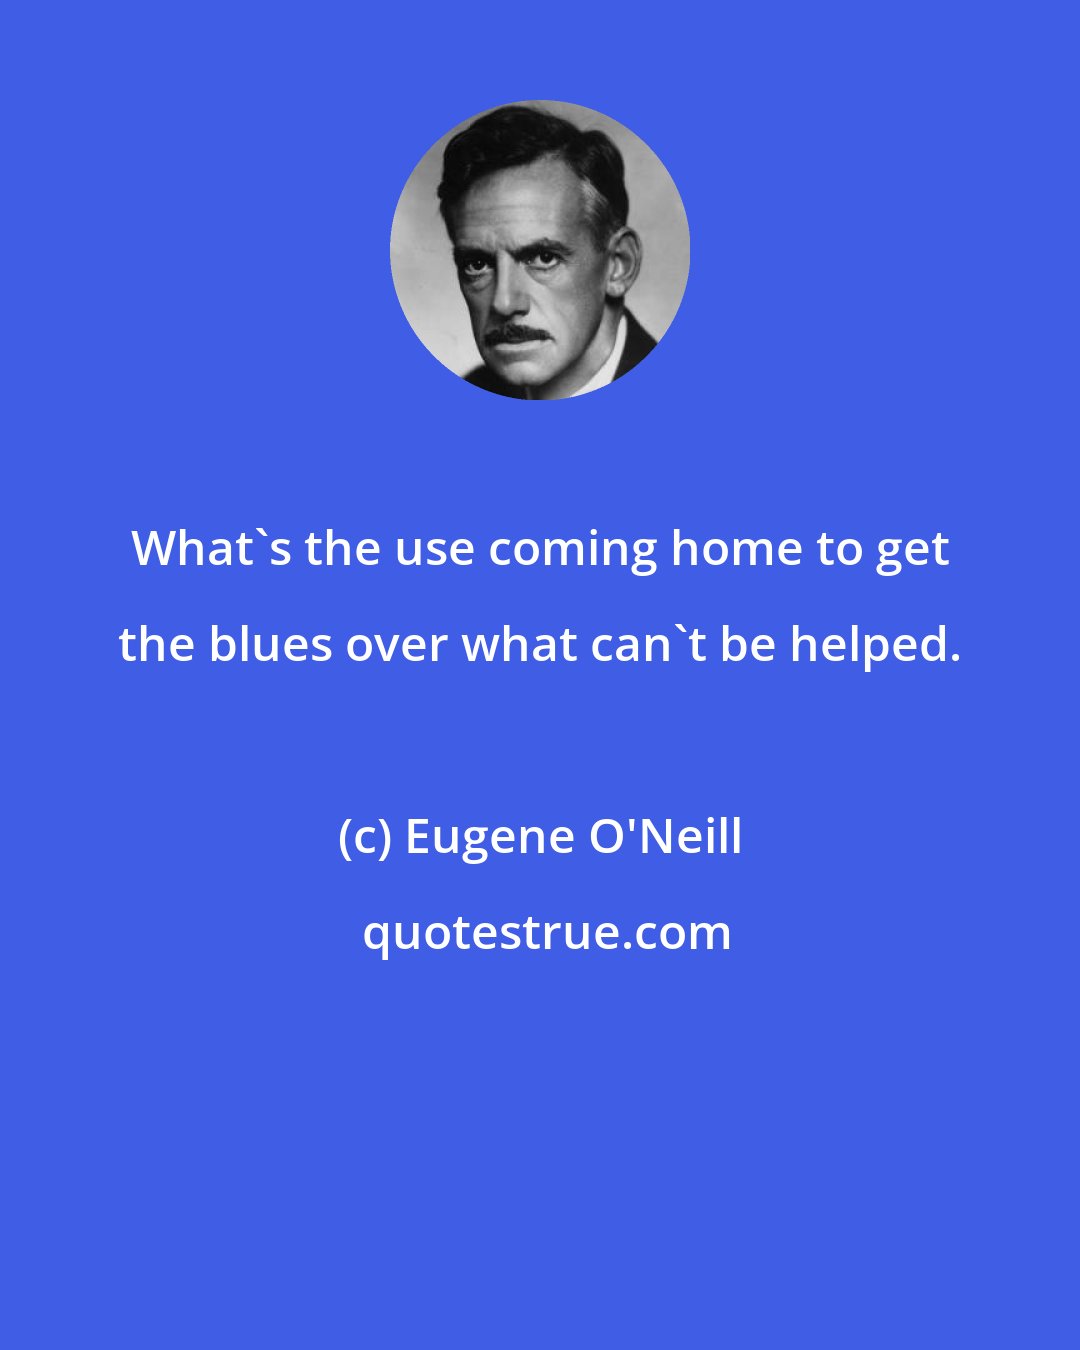 Eugene O'Neill: What's the use coming home to get the blues over what can't be helped.